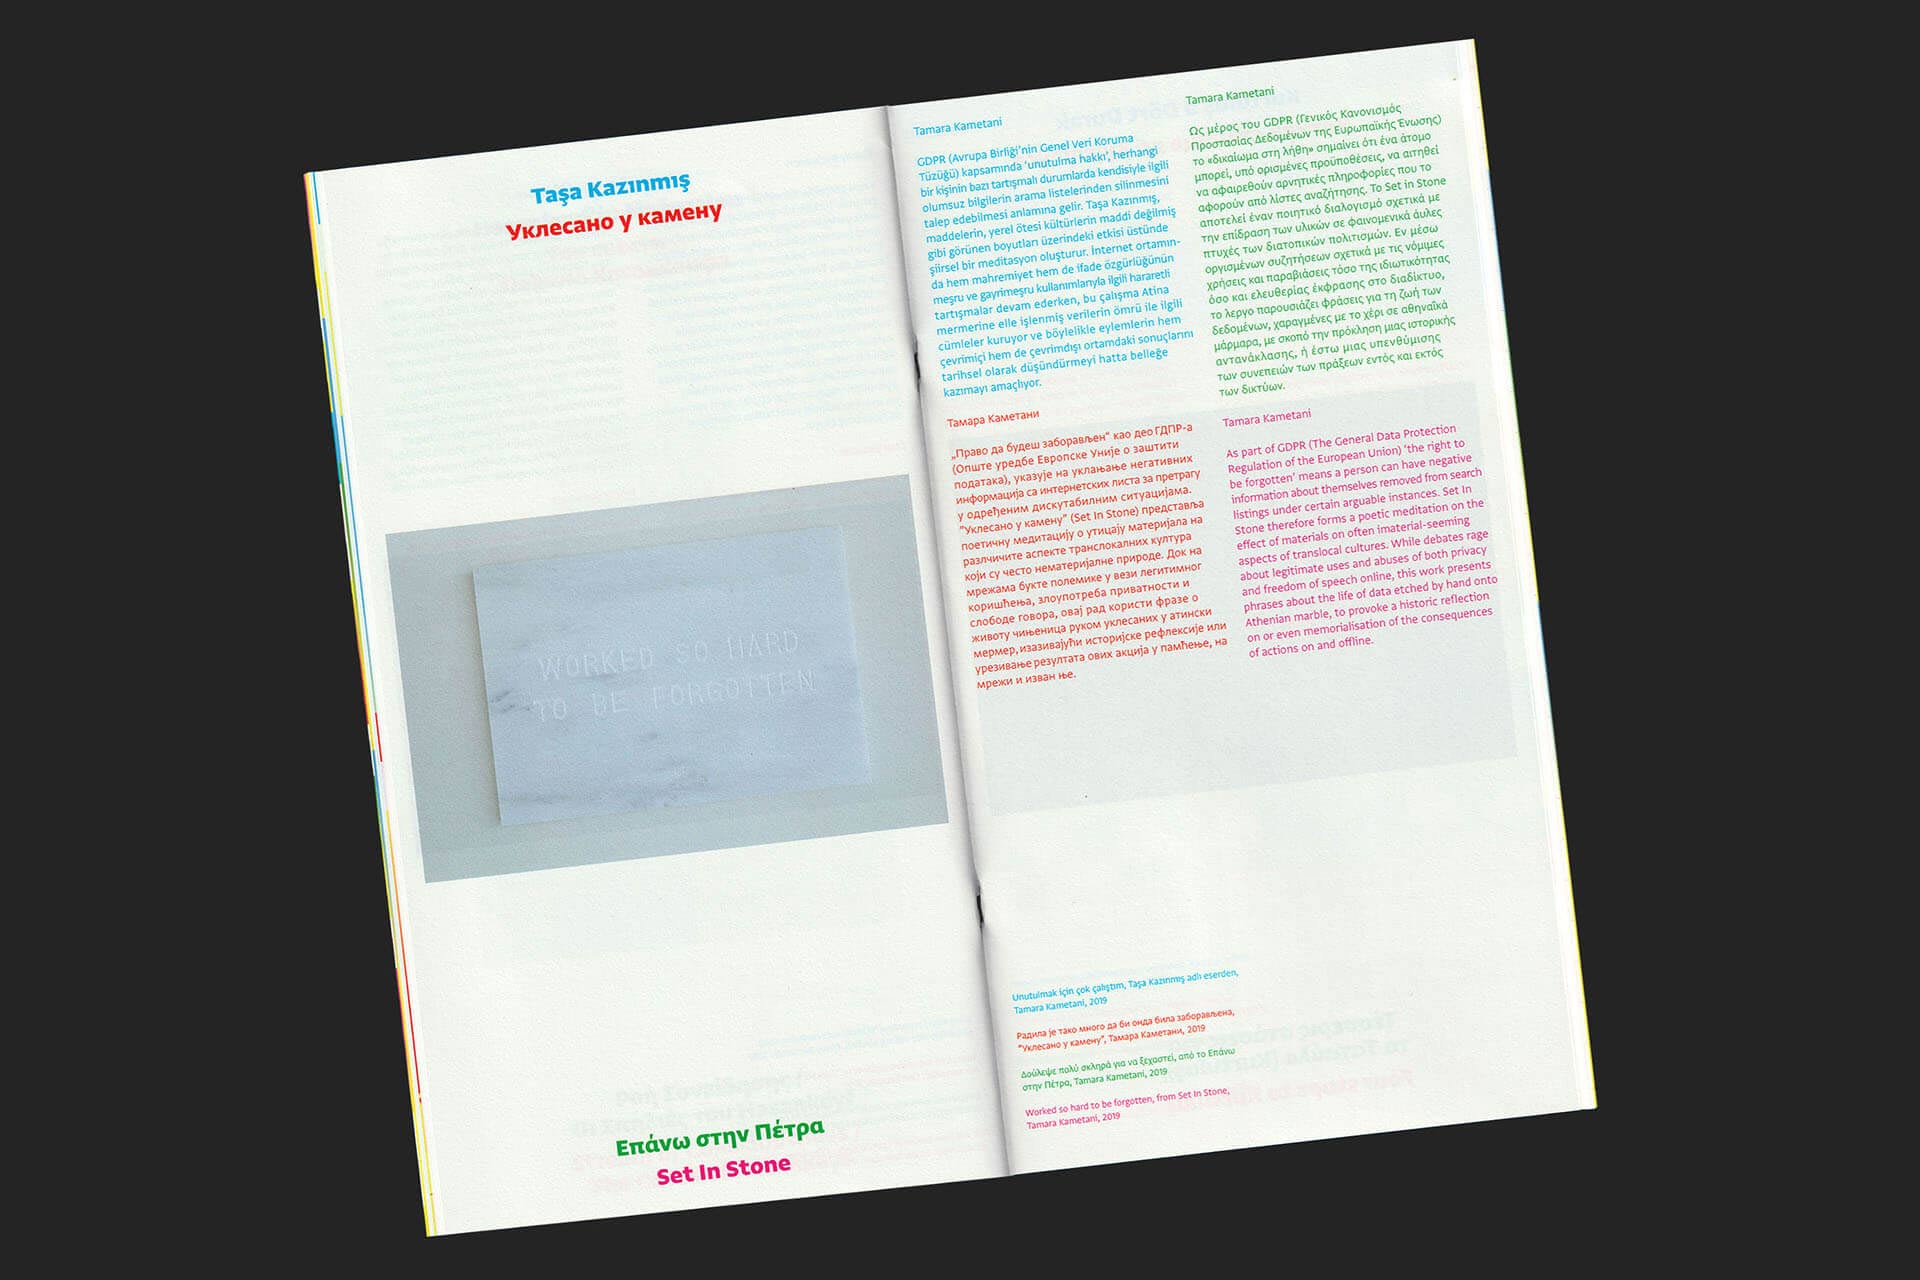 The booklet scan shows an artists work who is part of the exhibition, along side it the visual identity and typography is on display, showing all 4 languages next to each other allowing users from around the globe to read the same information at the same time.